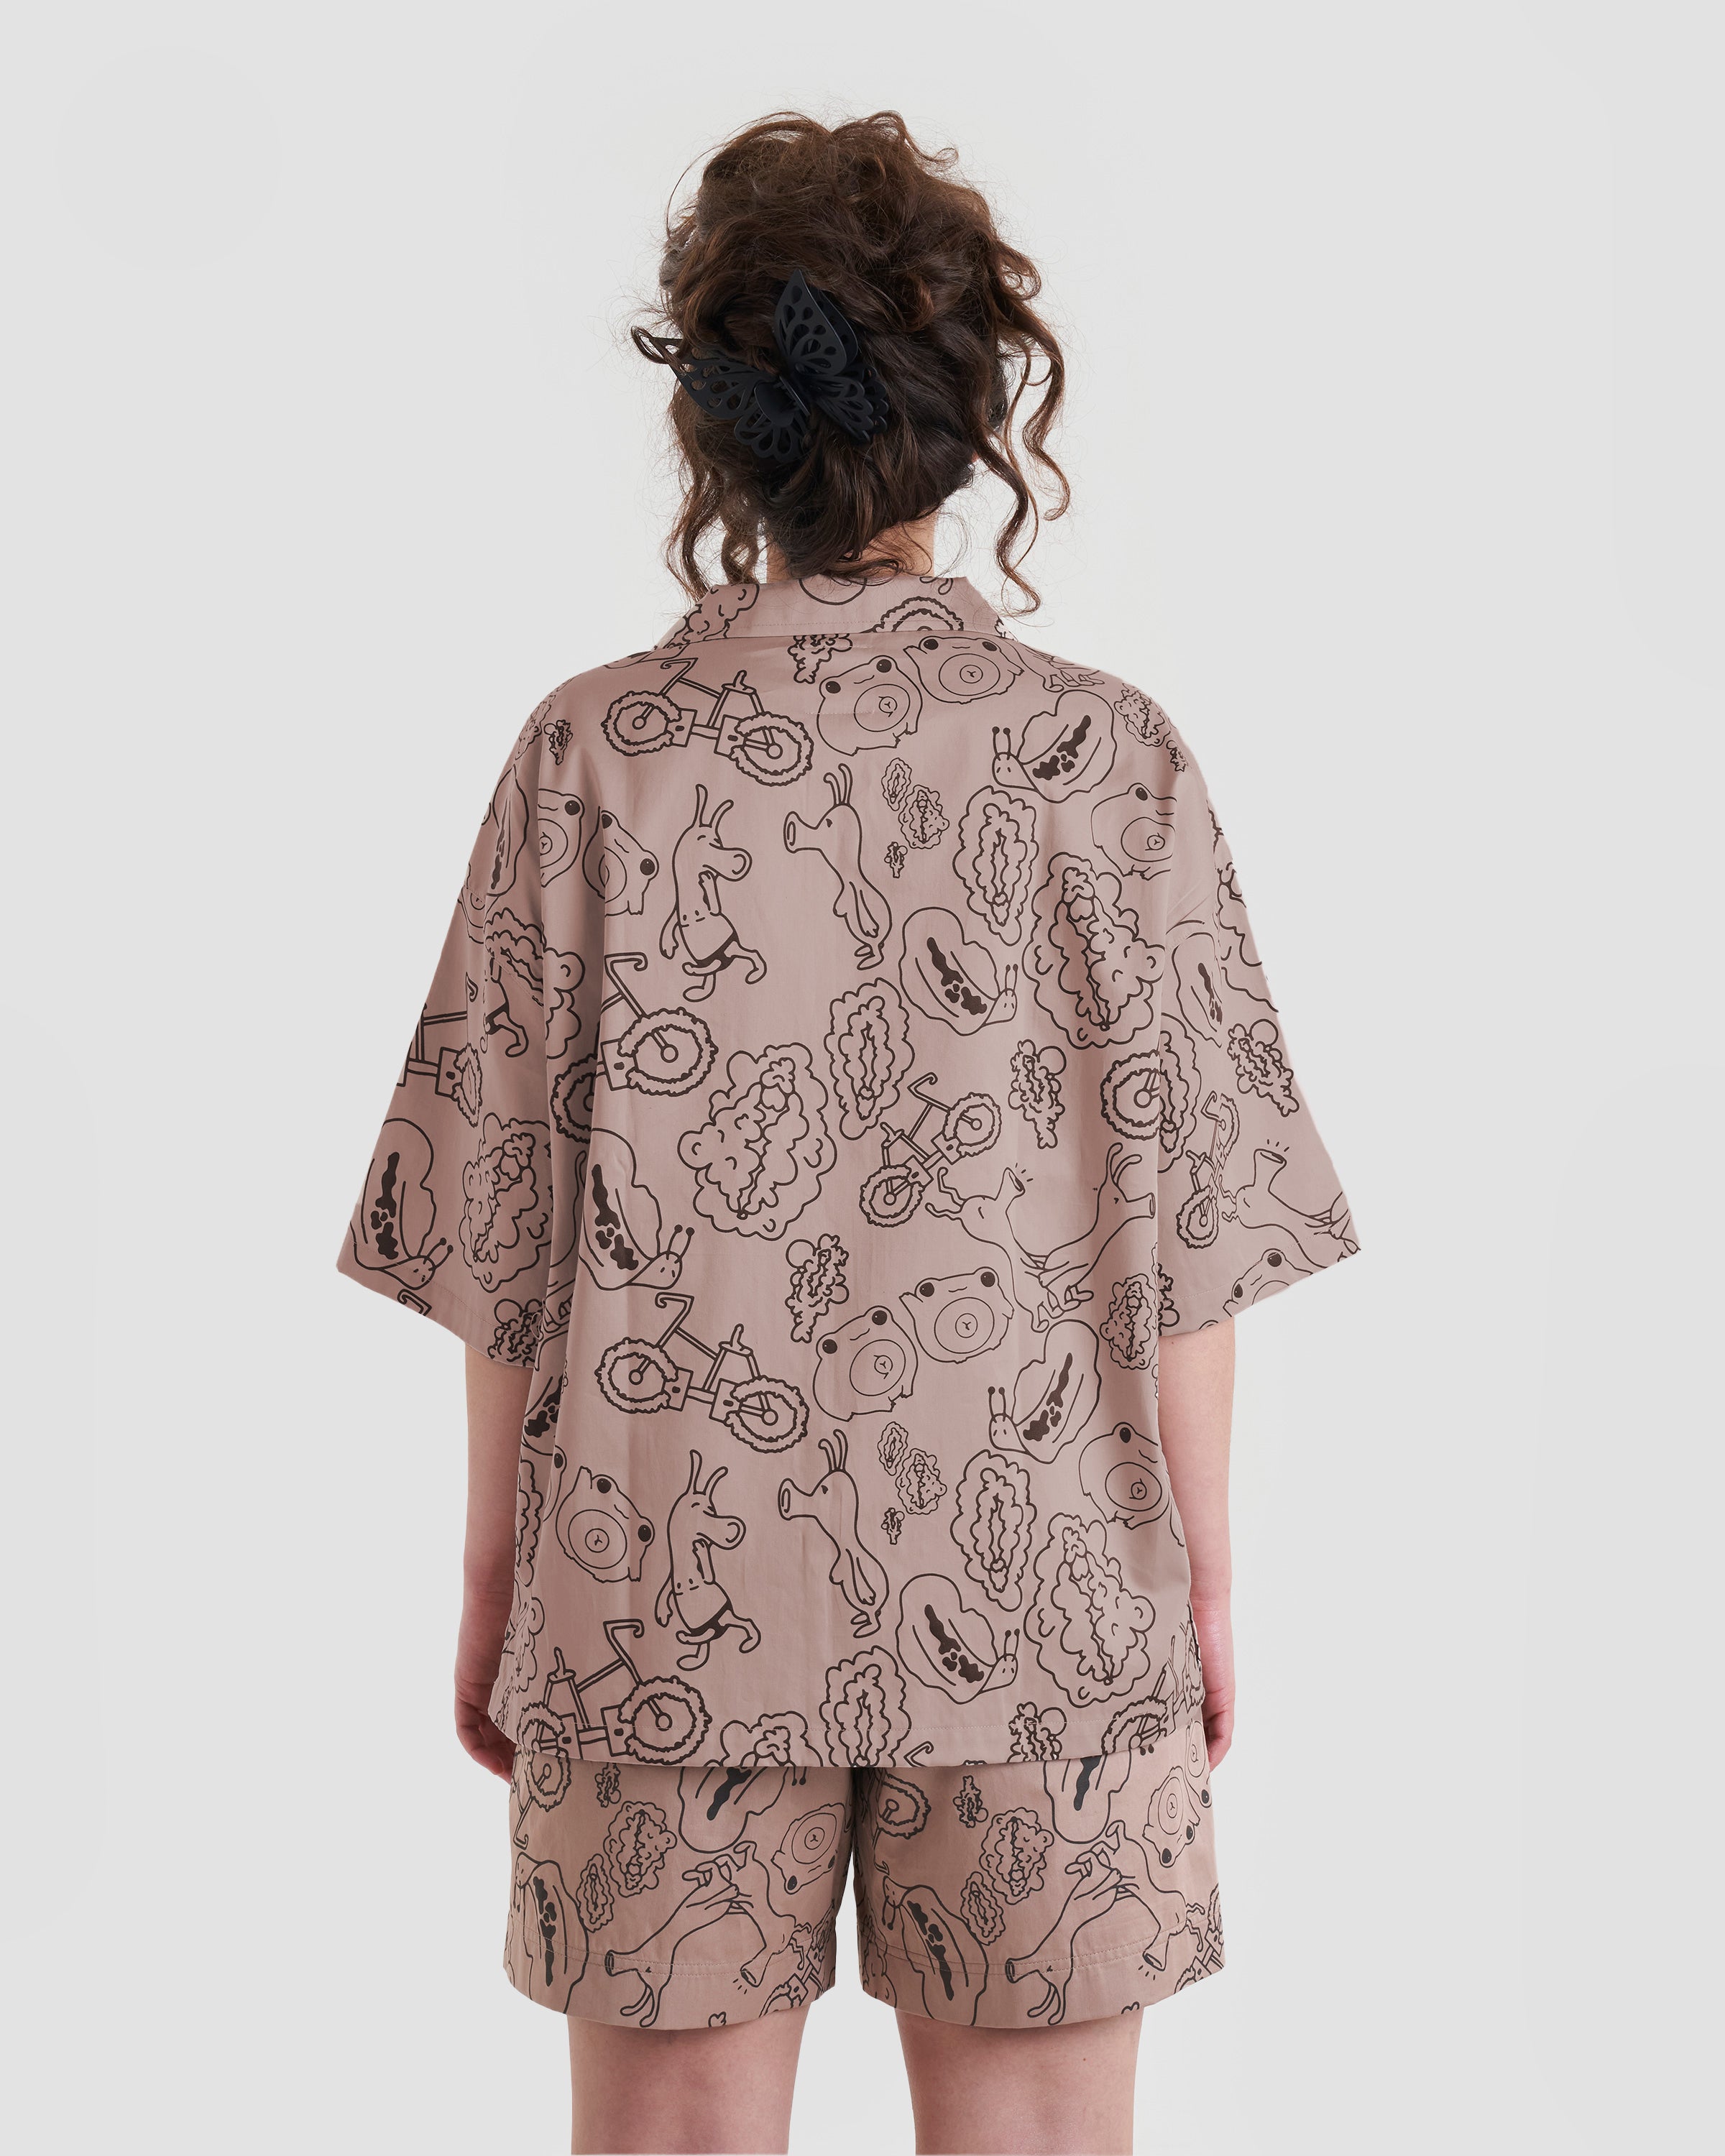 Taboo Oversized Baggy Button Up Shirt with Graphic Print in Light Brown